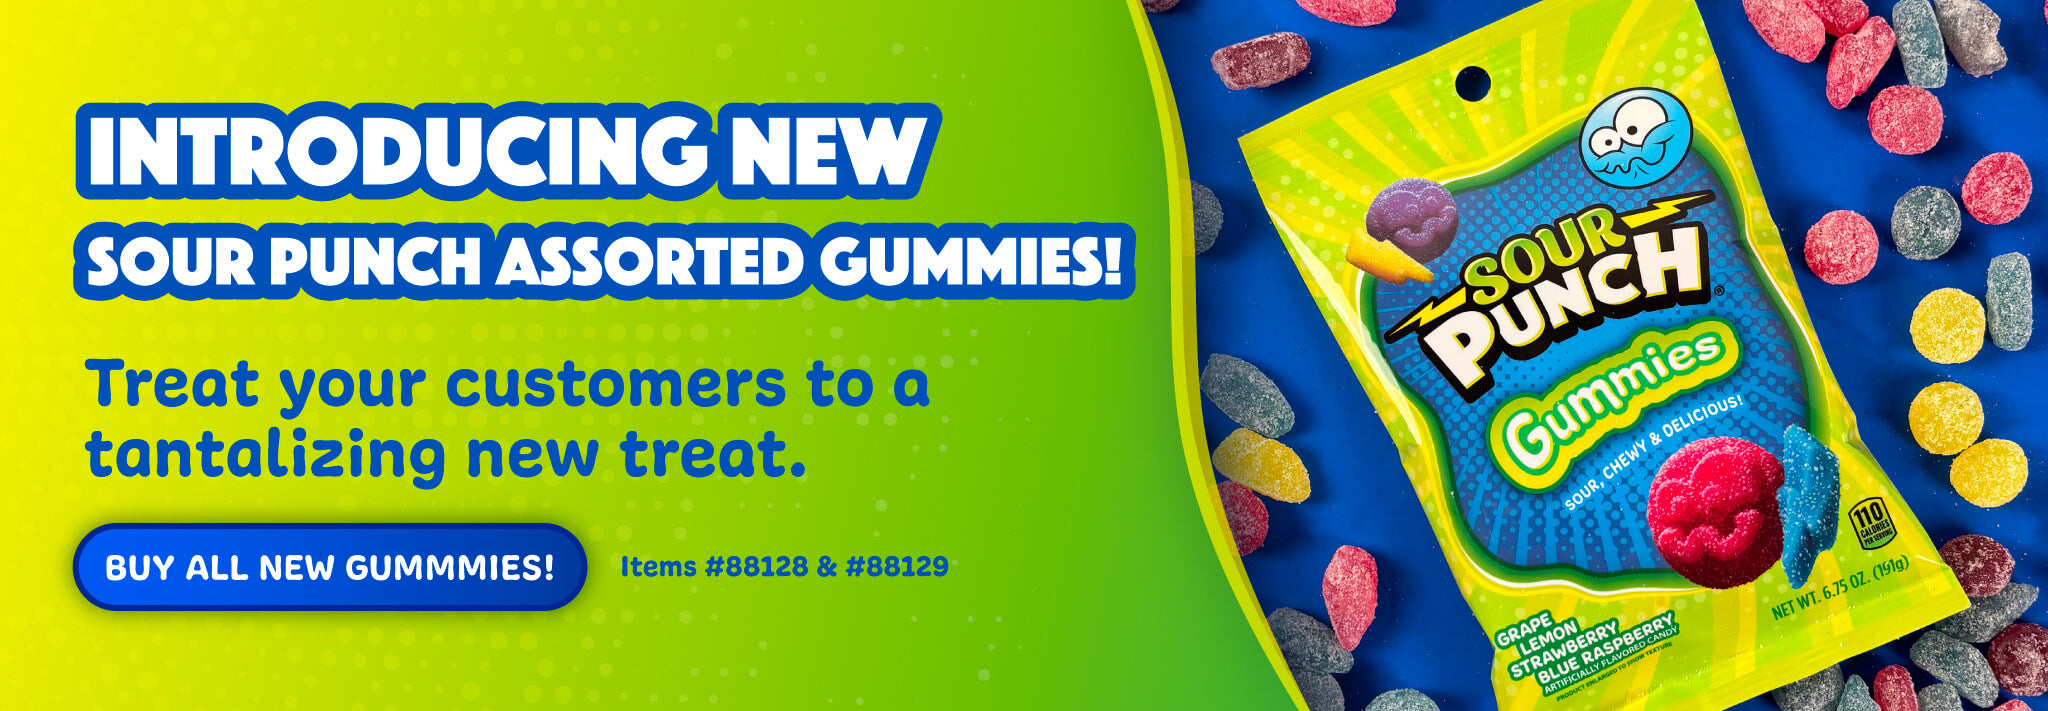 Introducing new Sour Punch Gummies! Treat your customer to a tantalizing new treat. Items #88128 & #88129